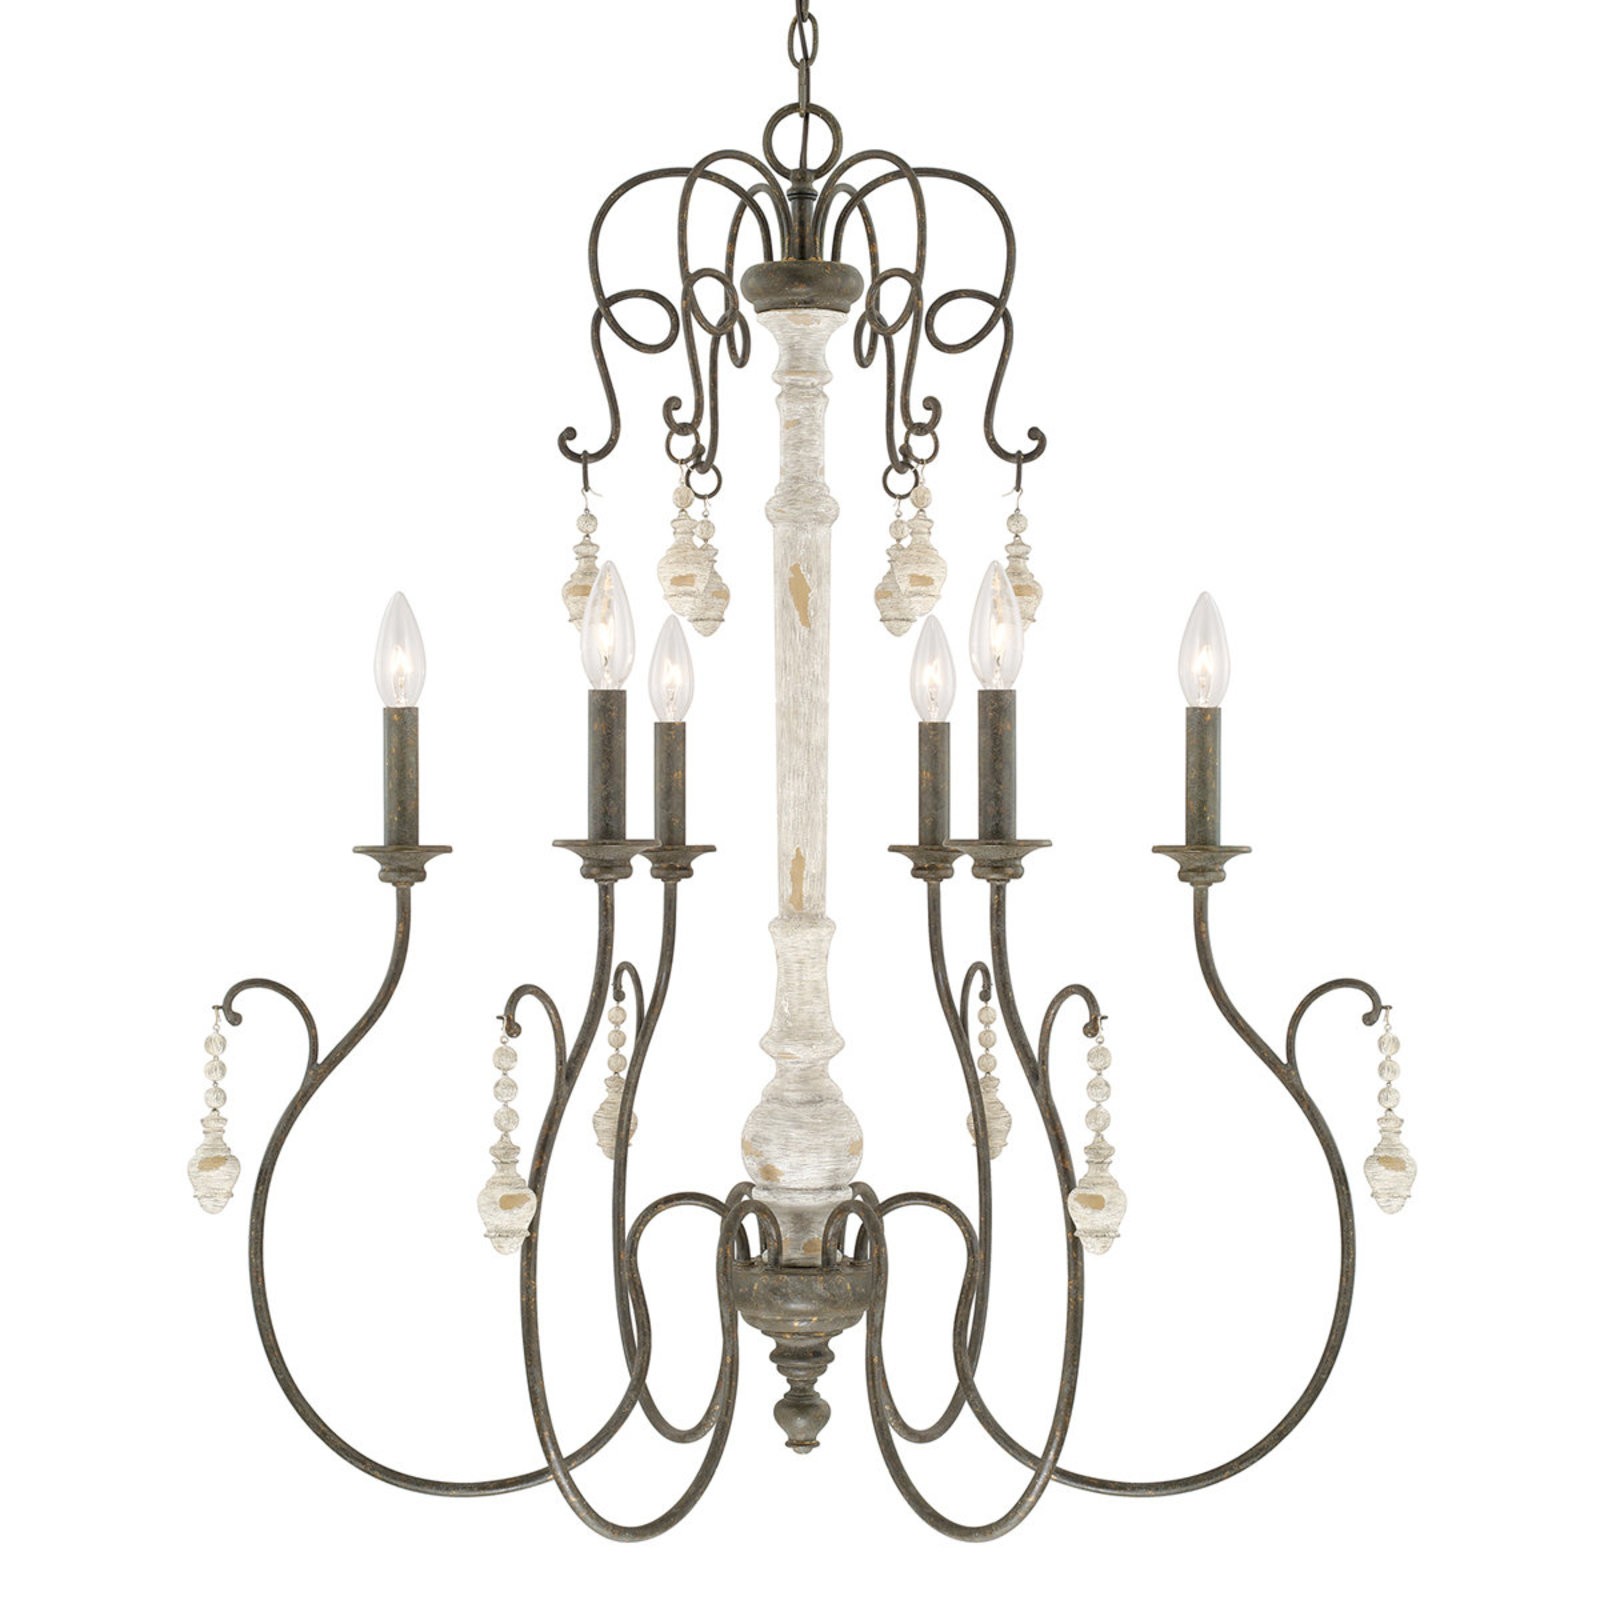 Classic french country chandelier small shades of light